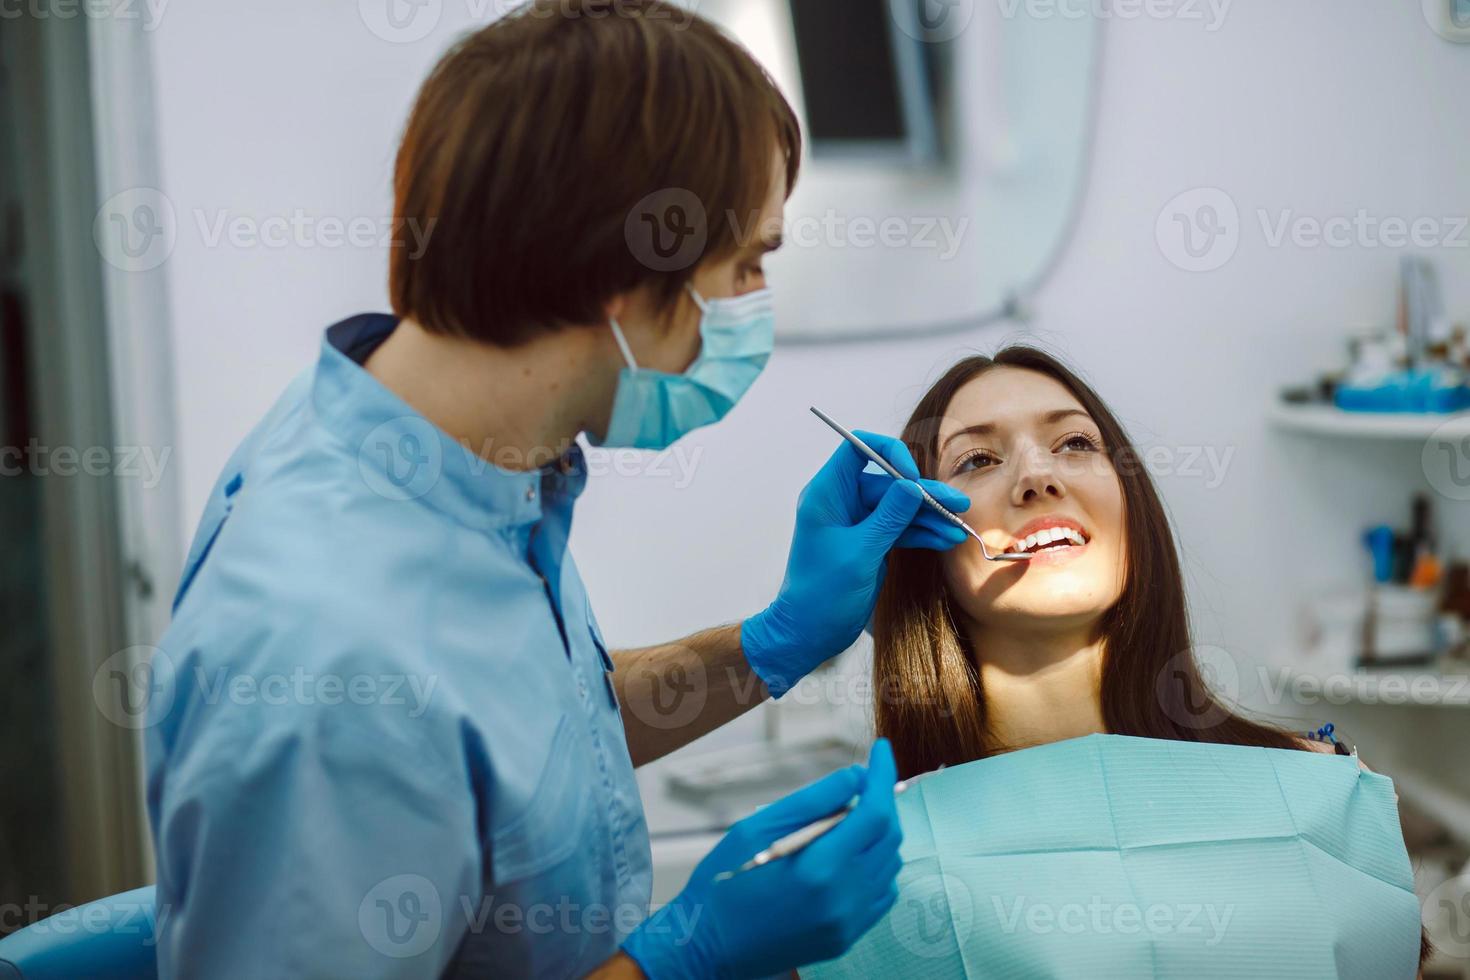 Inspection of the teeth of the girl with the help of a mirror photo